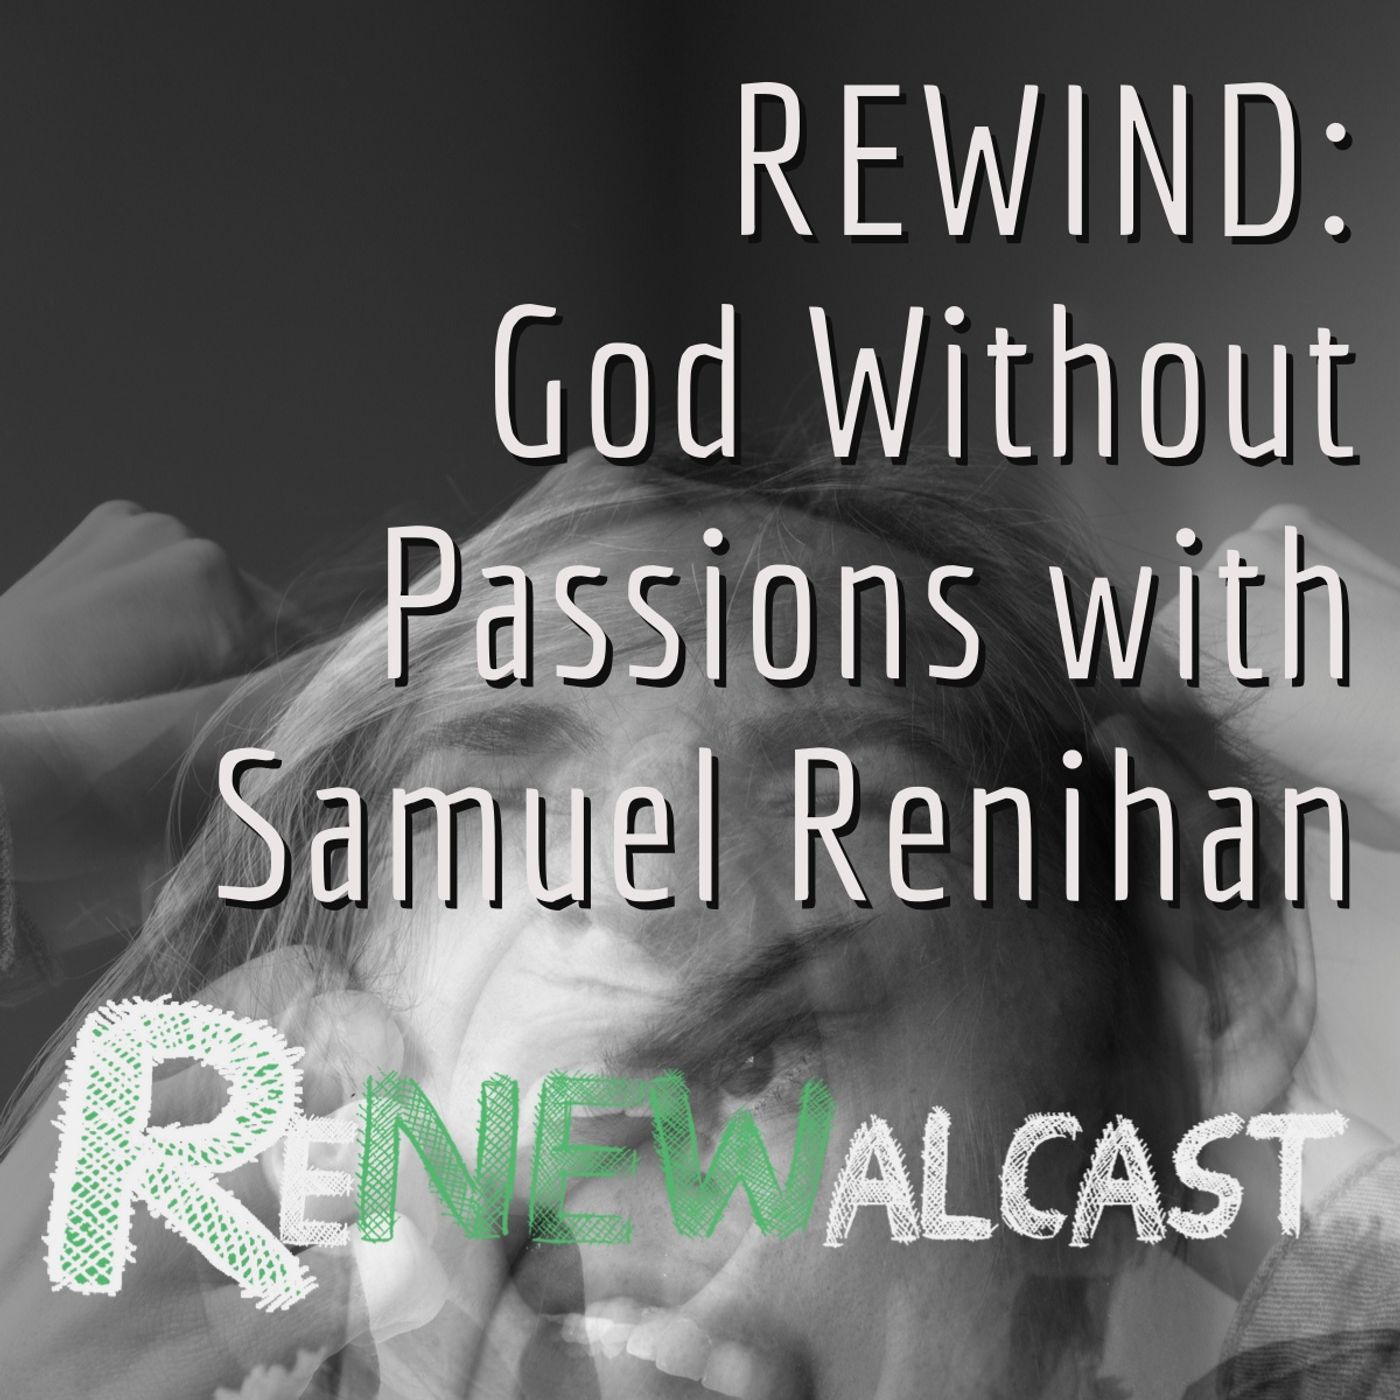 REWIND: God Without Passions with Samuel Renihan